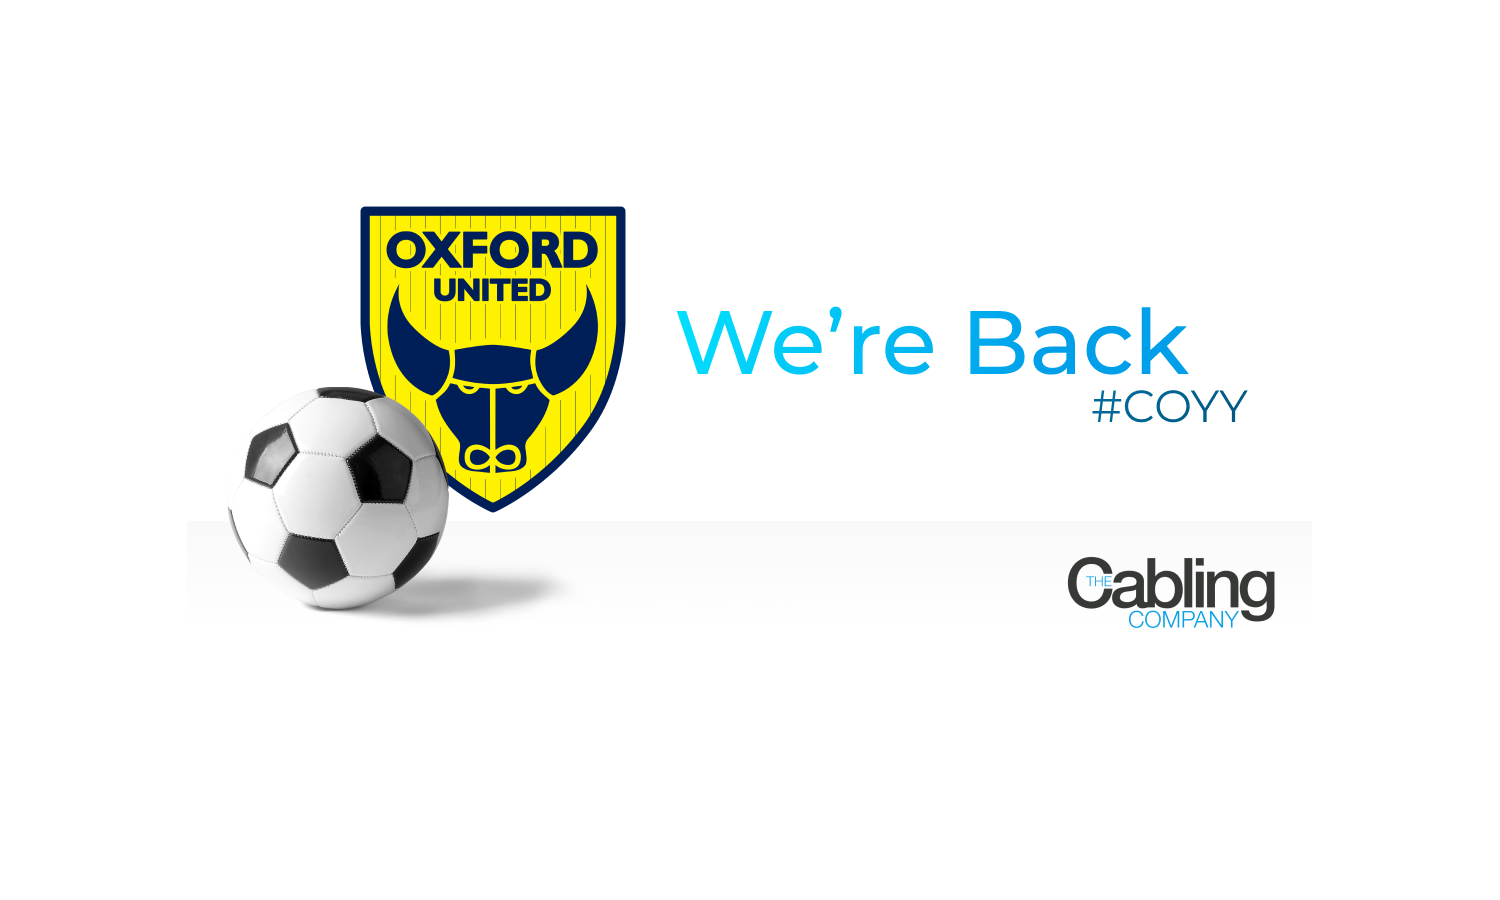 Featured image: The Cabling Company return to sponsor Oxford United's Player of the Month award for the 2022/23 season